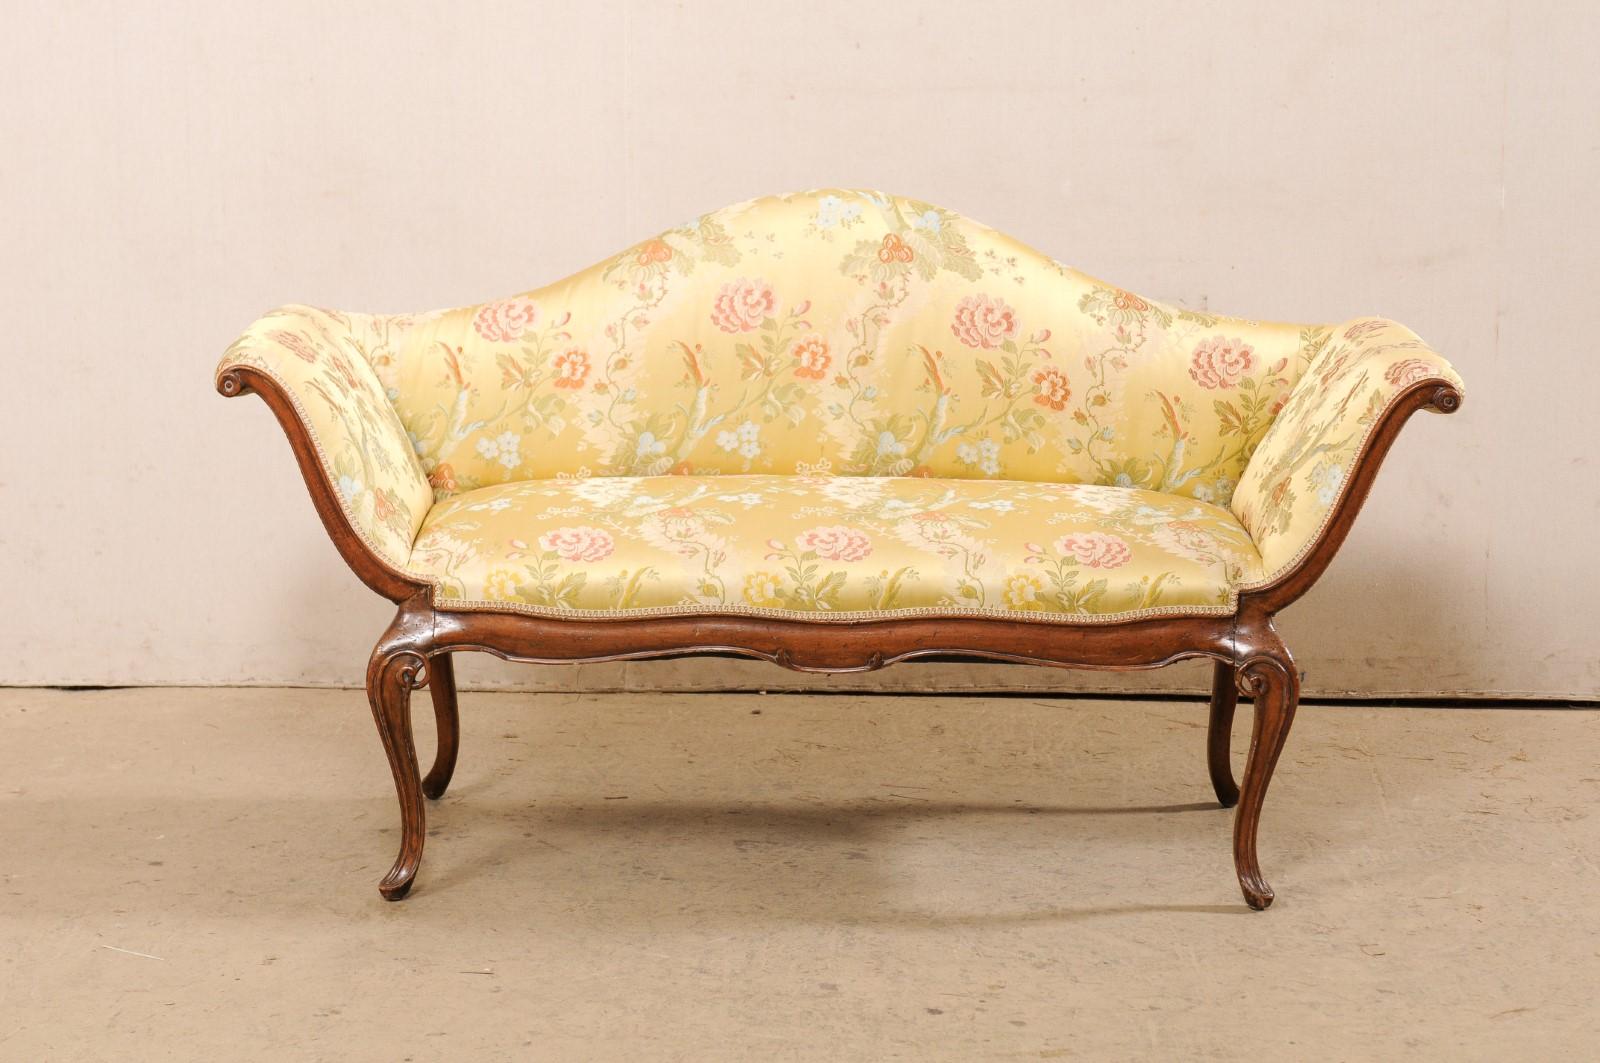 An Italian Venetian style carved wood & upholstered sofa from the early 19th century. This antique settee from Italy features an elegantly arched camel back with gracefully outward tilting arms. Delicately carved wood trim lines the front side of